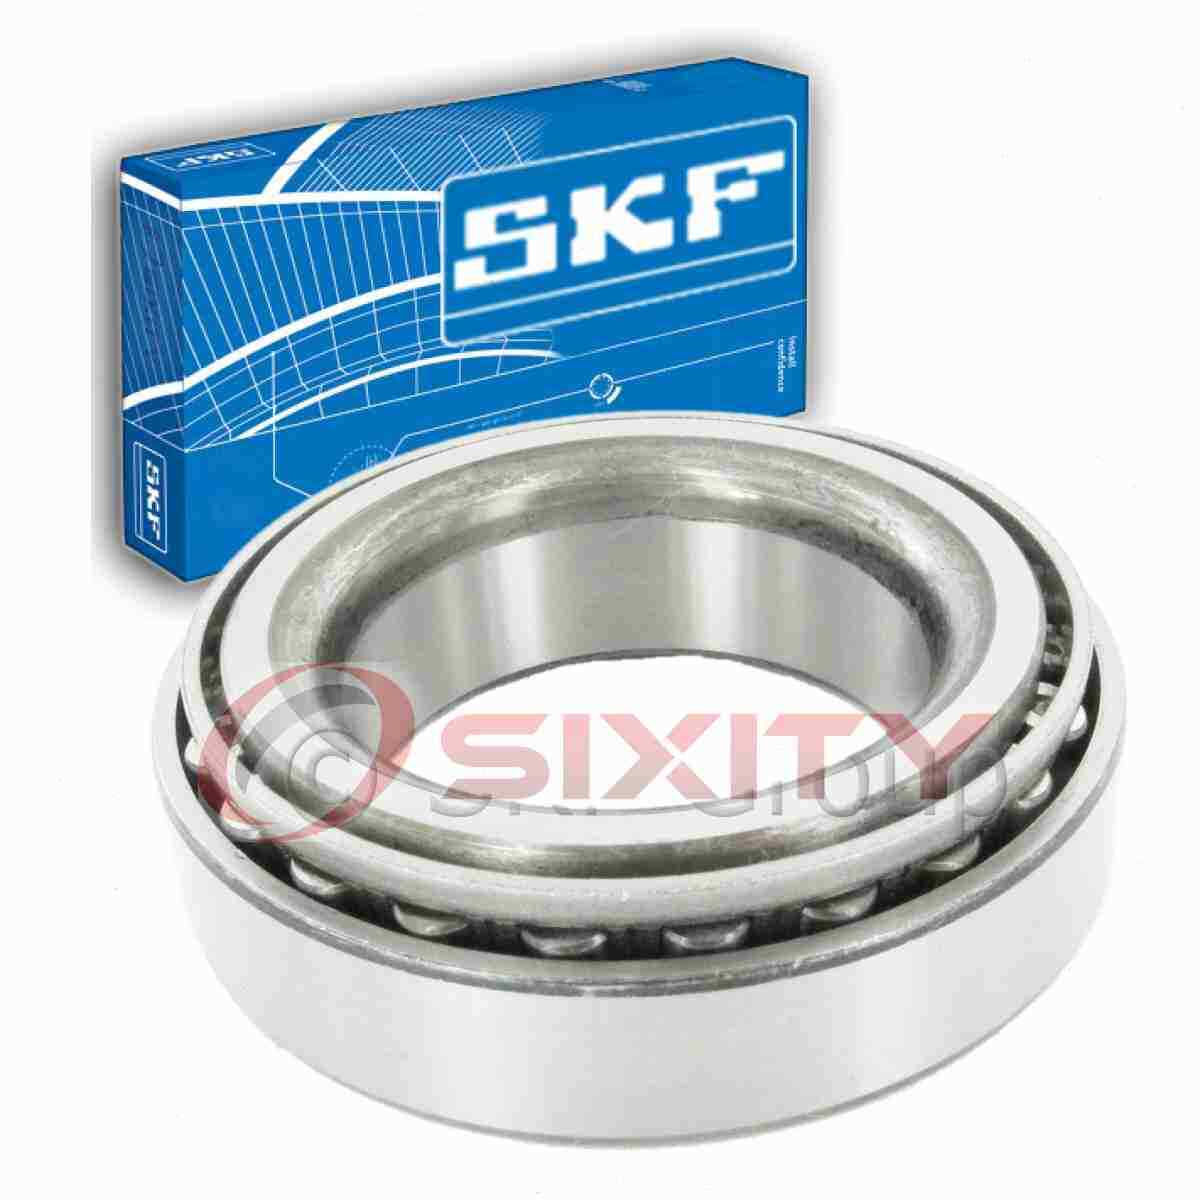 SKF Front Inner Wheel Bearing for 1975-1977 Plymouth Gran Fury Axle lc